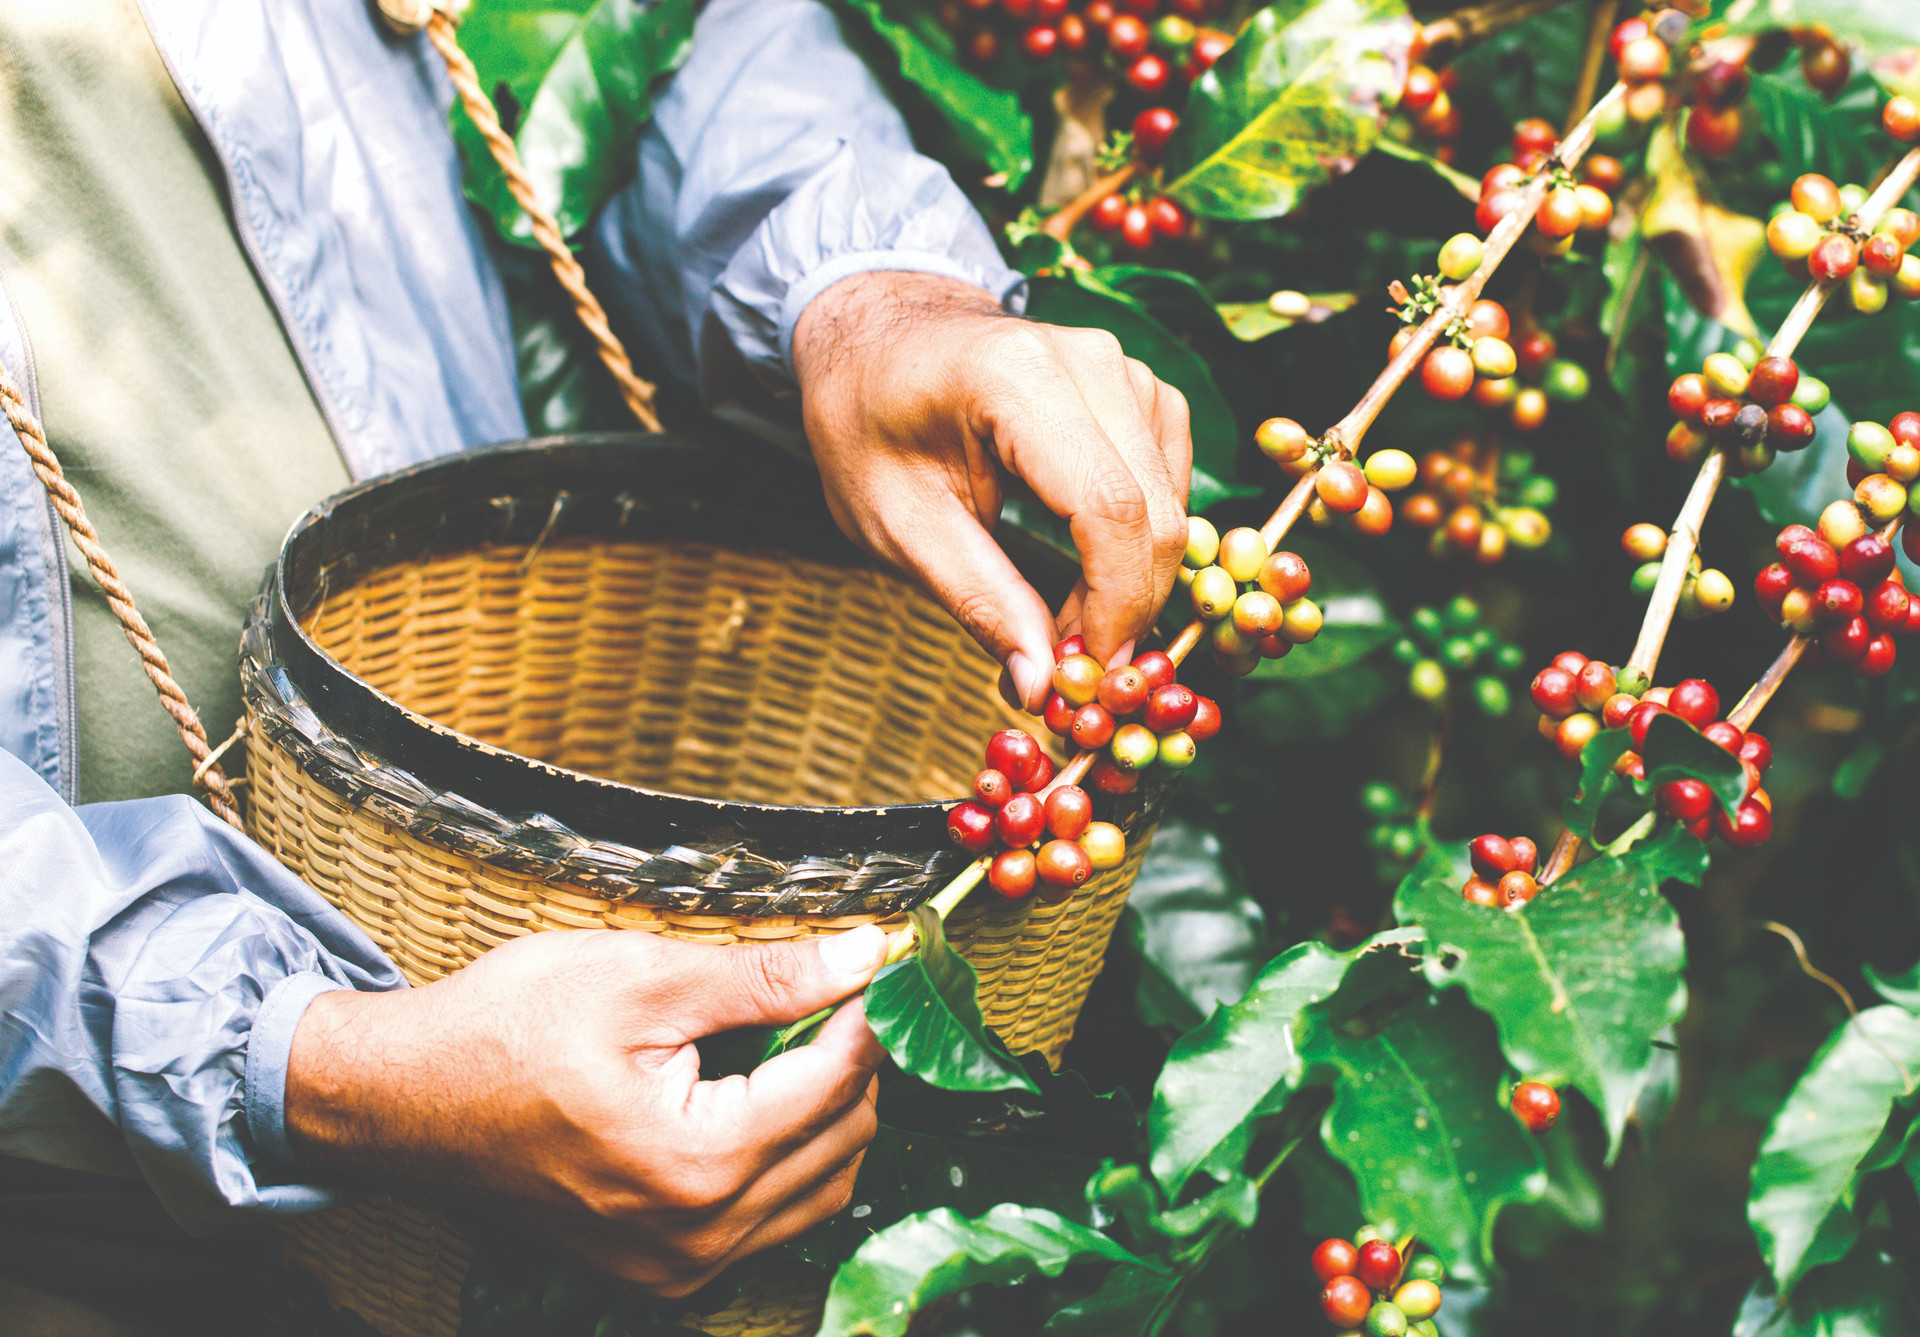 arabica-coffee-berries-with-agriculturist-handsrobusta-arabica-coffee-berries-compressed.jpg